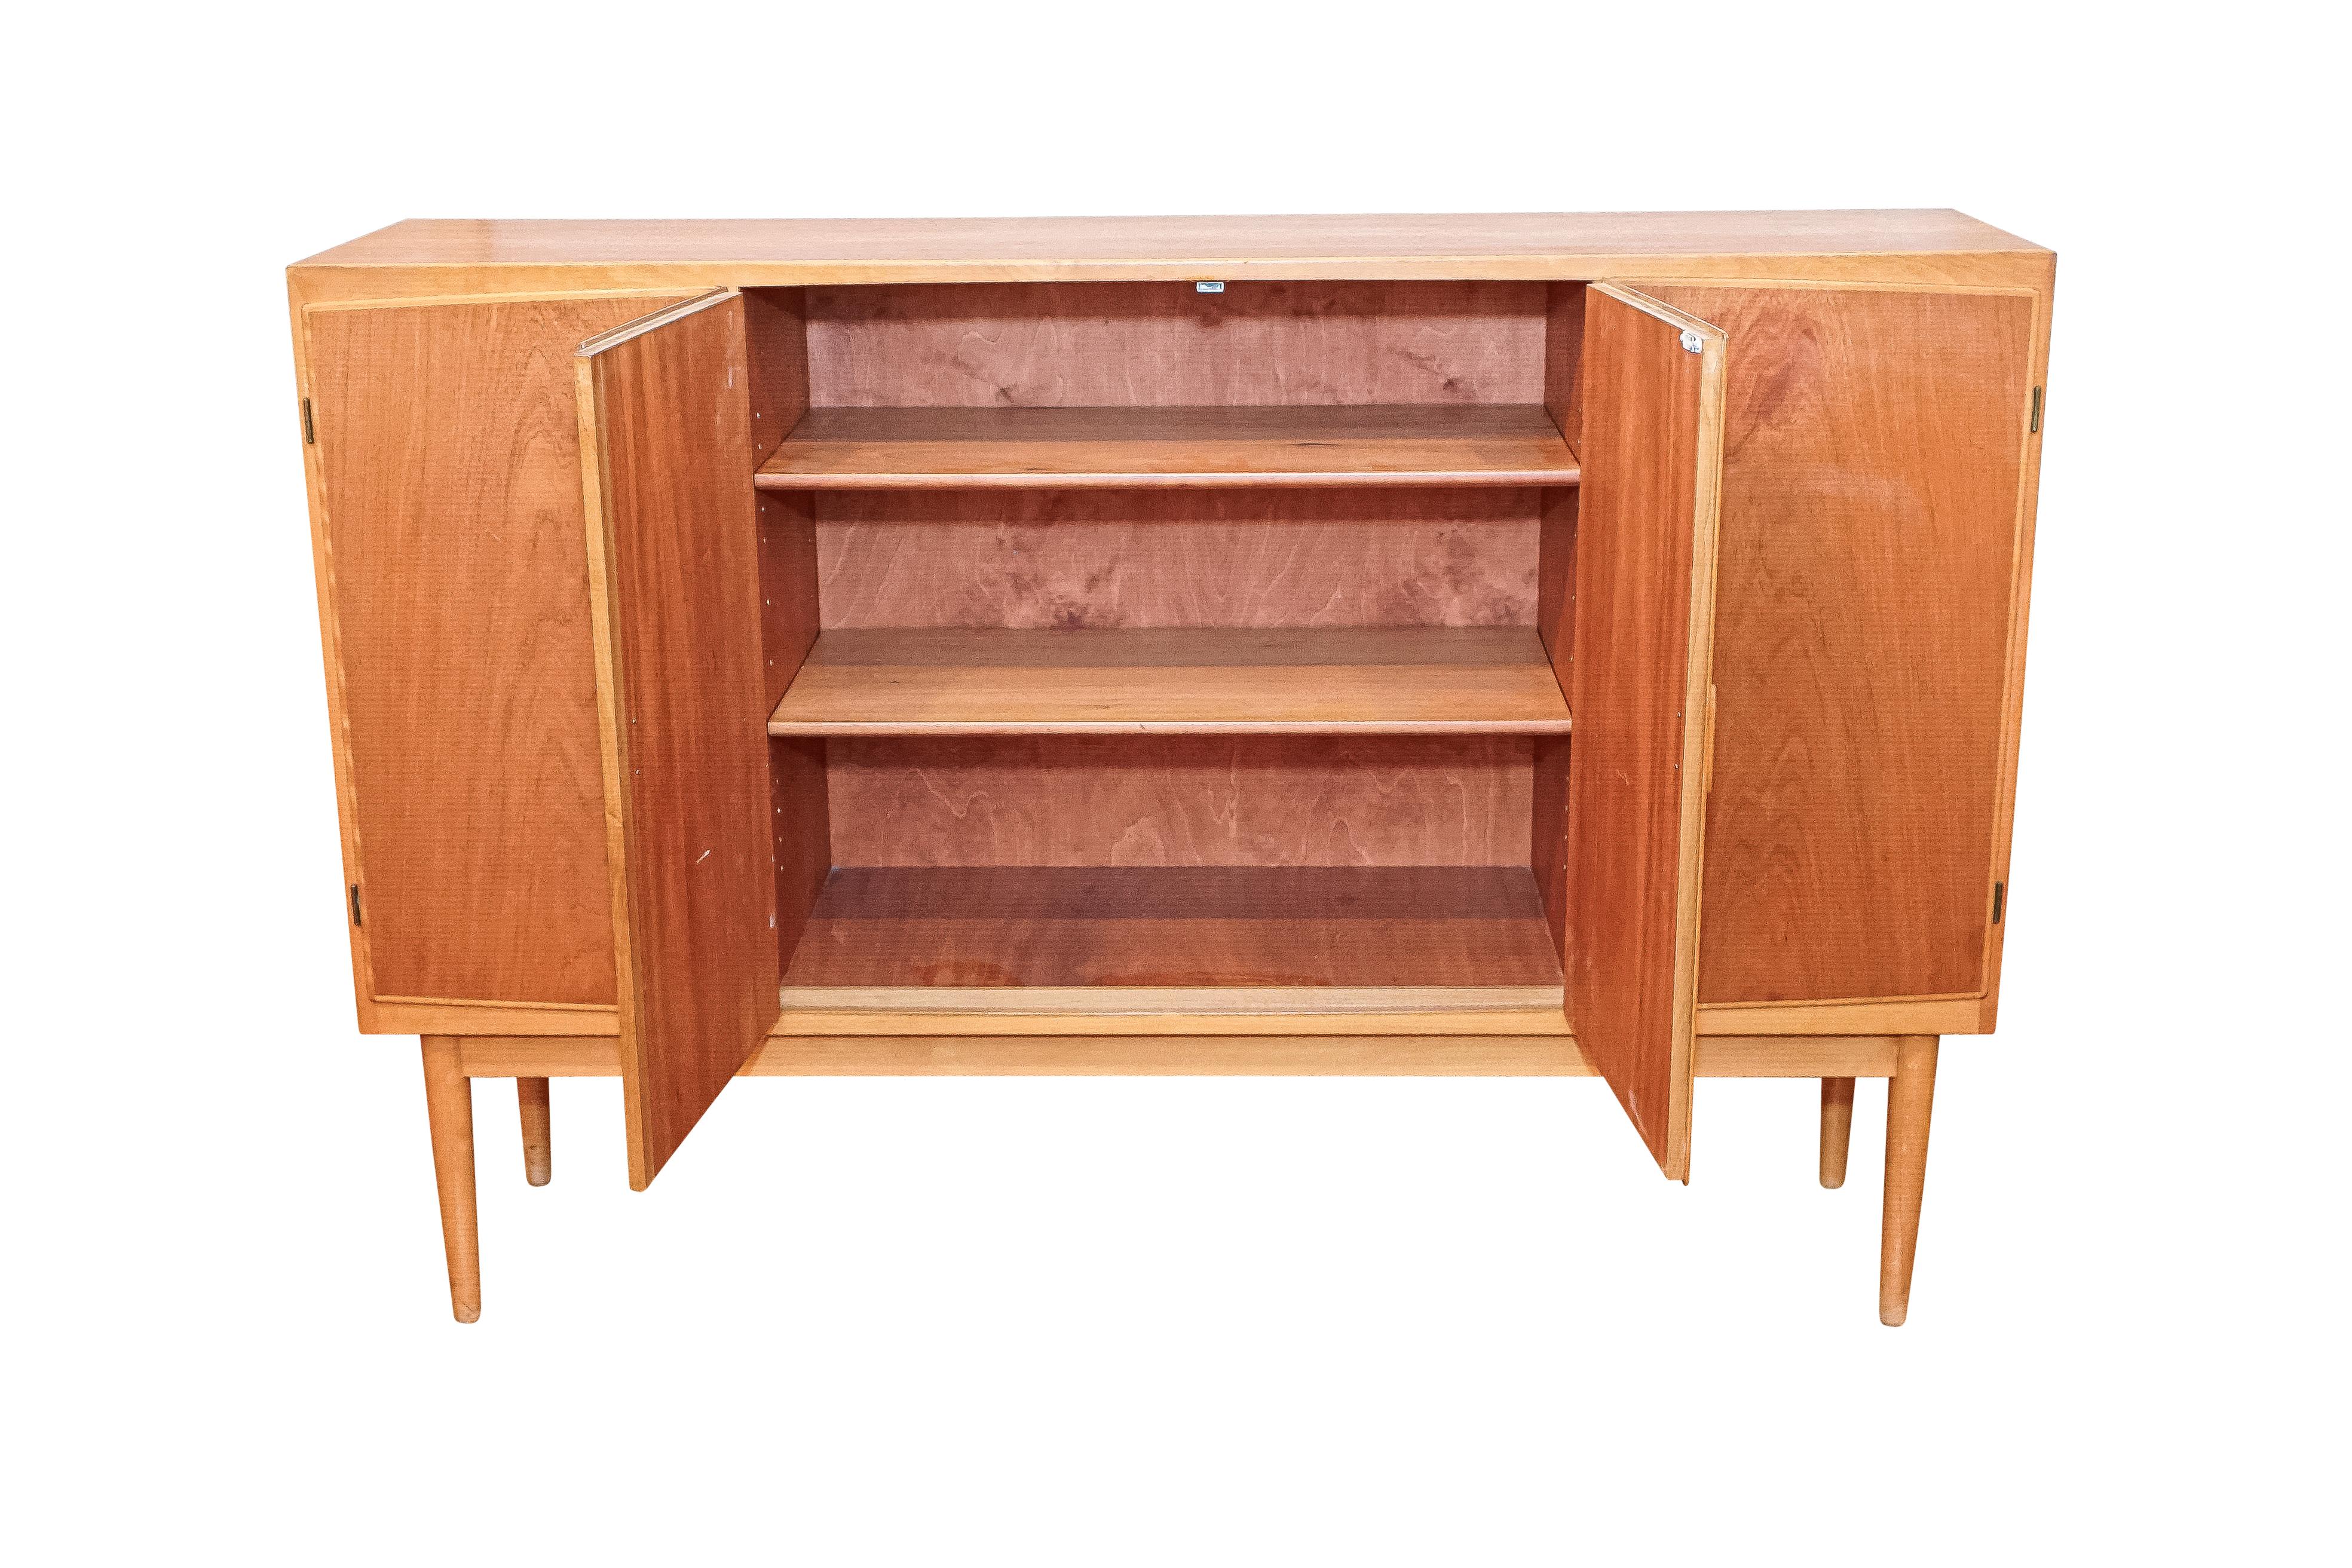 This fine example of Danish modern design is the work of the renowned cabinetmaker Poul Jeppesen, and is part of the heralded Rungstedlund series of the early 1950s. Interior shelves are adjustable and eight interior drawers are of varying size for